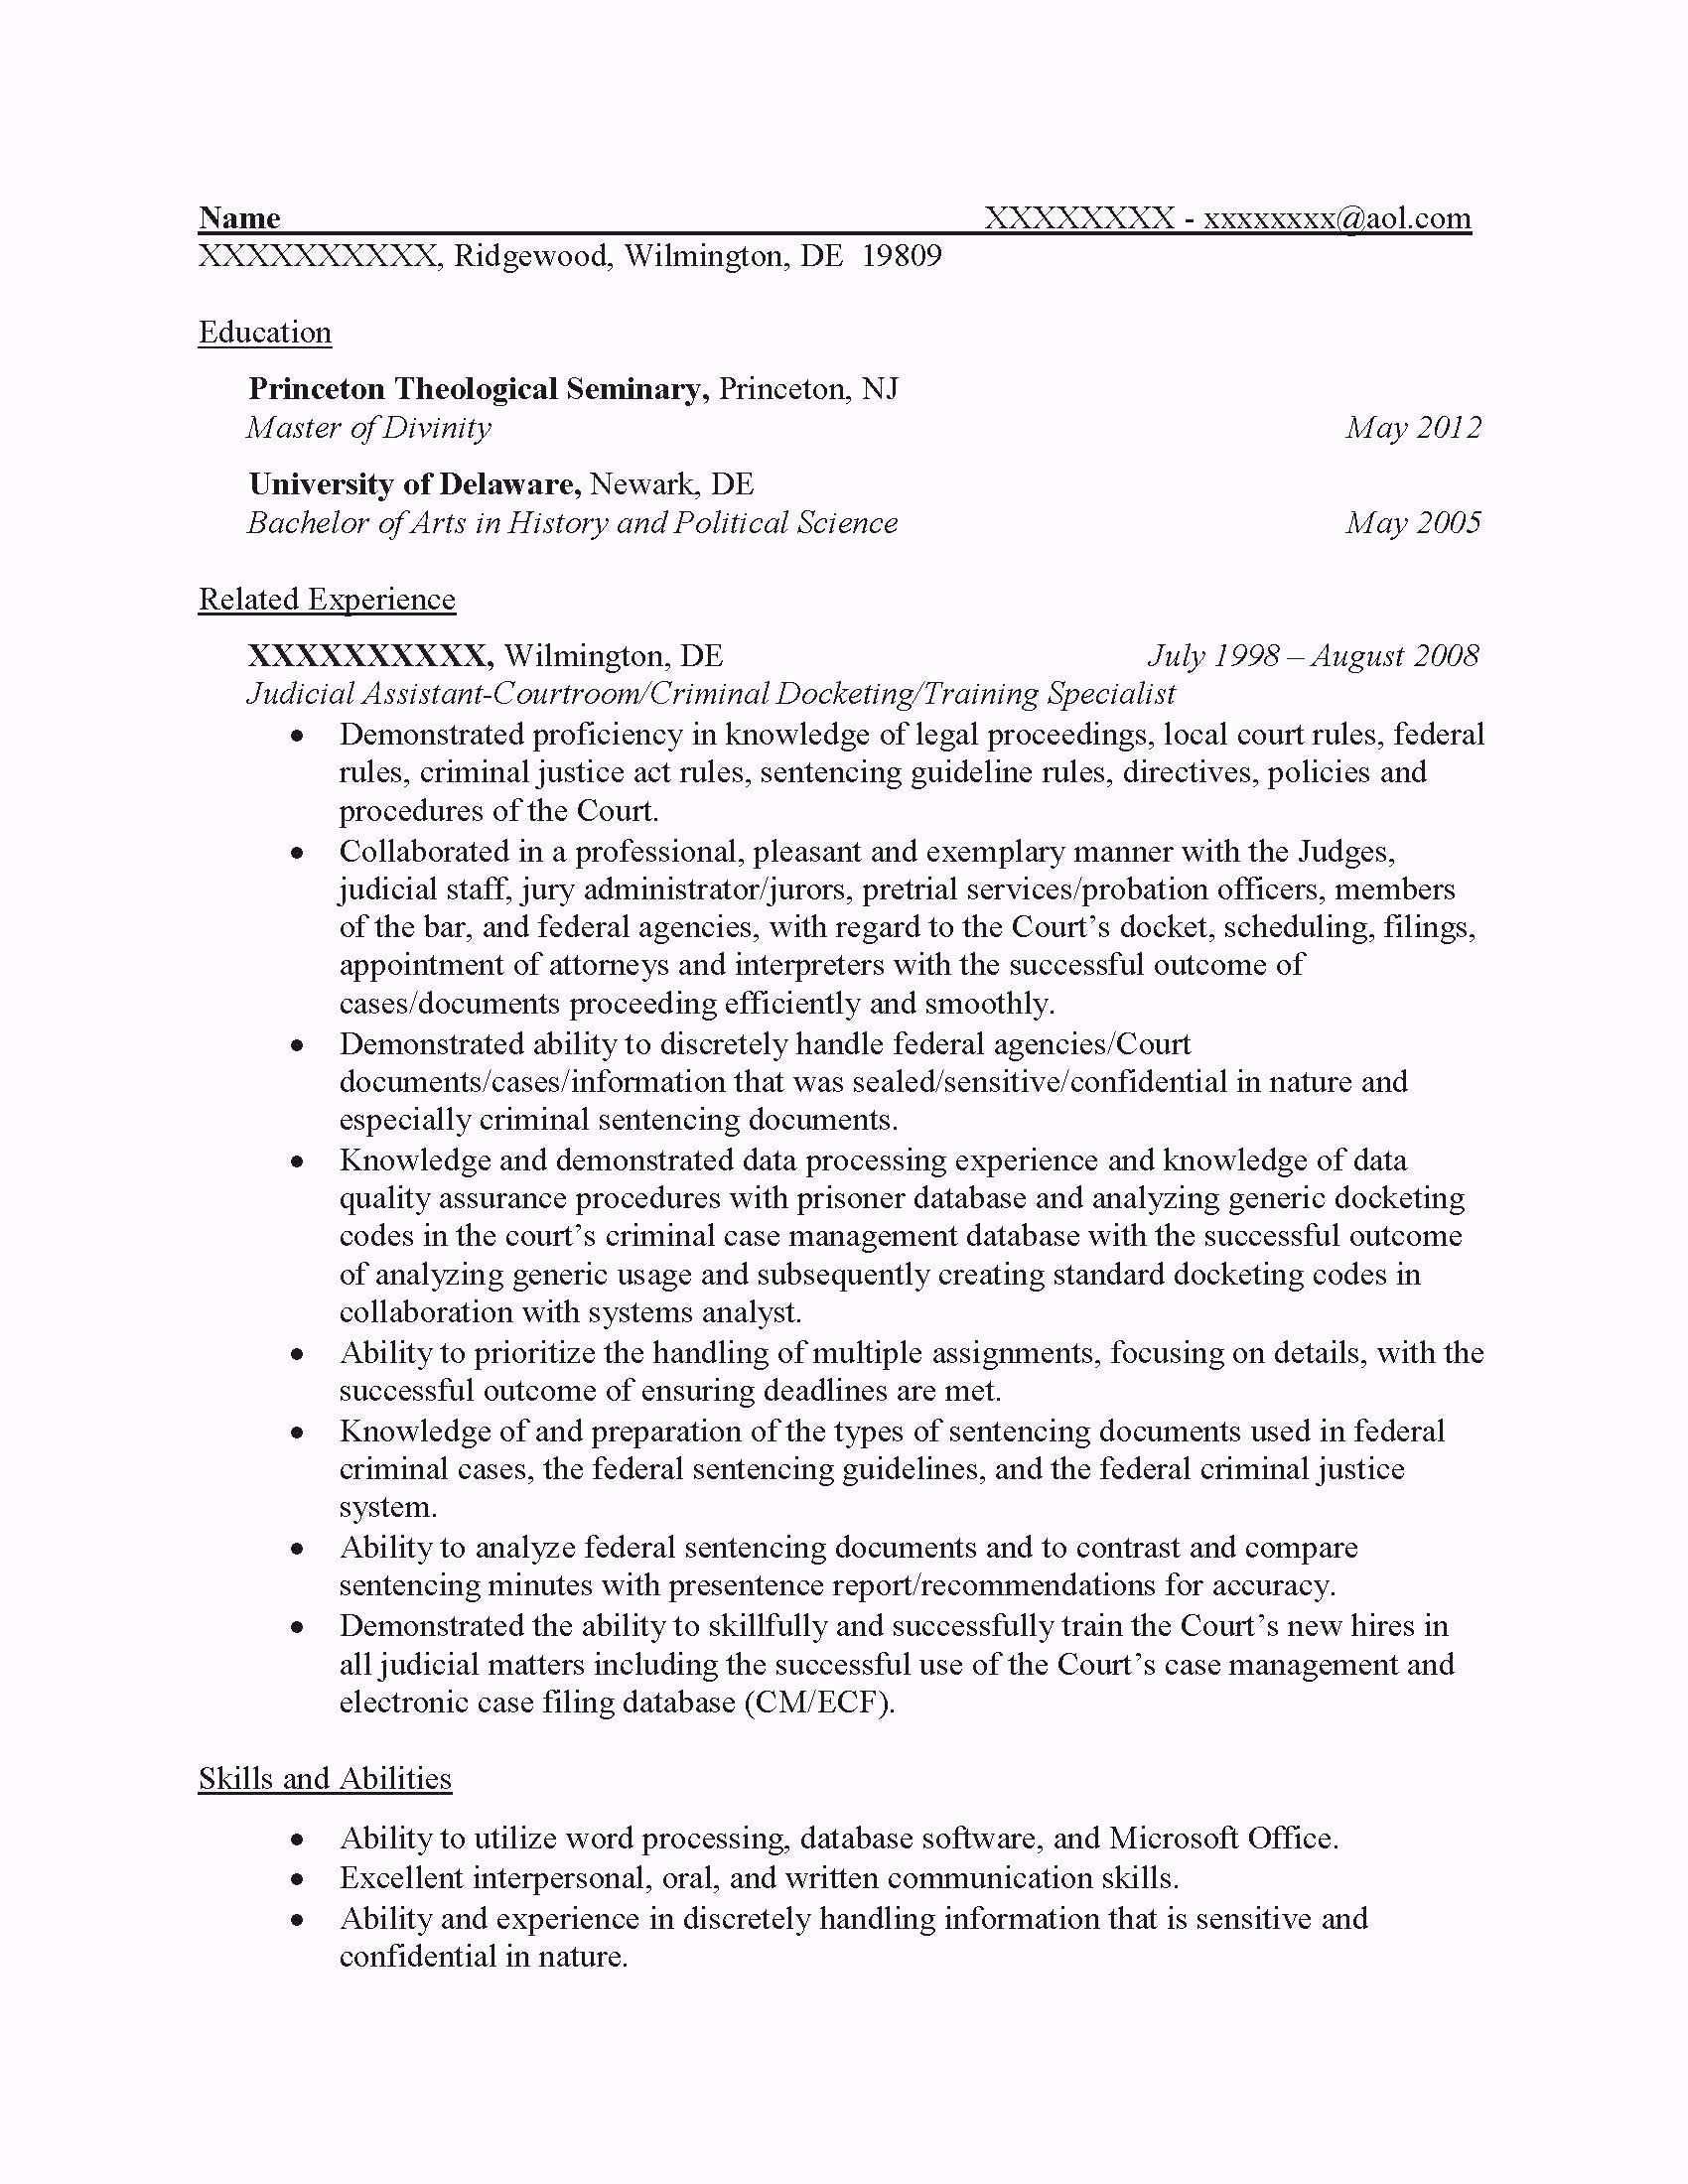 Federal Resume Cover Letter Example Awesome Dissertation Writing Help Uk Dissertation Writi In 2020 Resume Cover Letter Examples Cover Letter For Resume Federal Resume